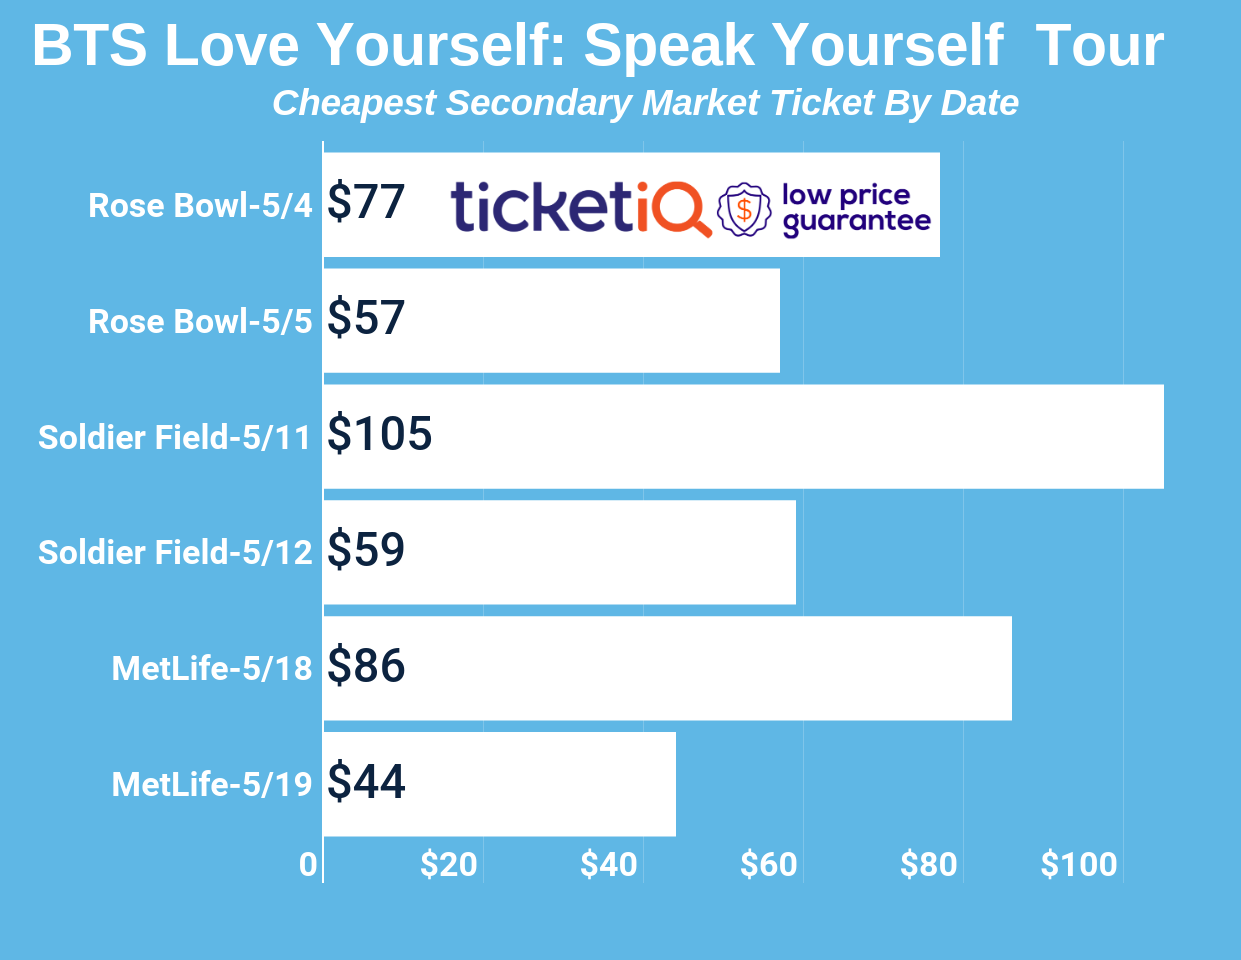 Ticket Prices For BTS 2019 Love Yourself: Speak Yourself Are Cheap Compared to 2018